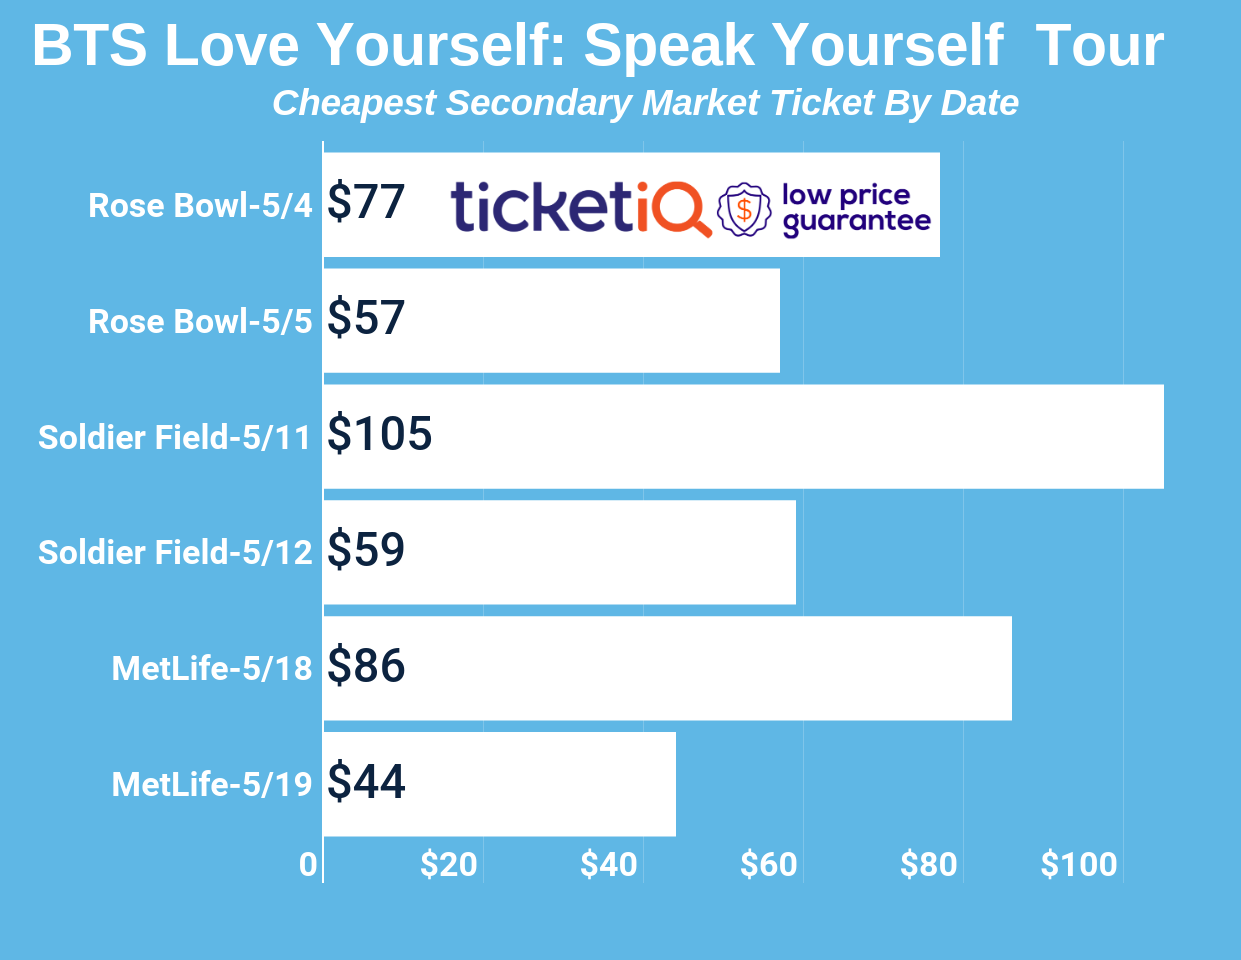 Ticket Prices For BTS 2019 Love Yourself: Speak Yourself Are Cheap Compared to 2018